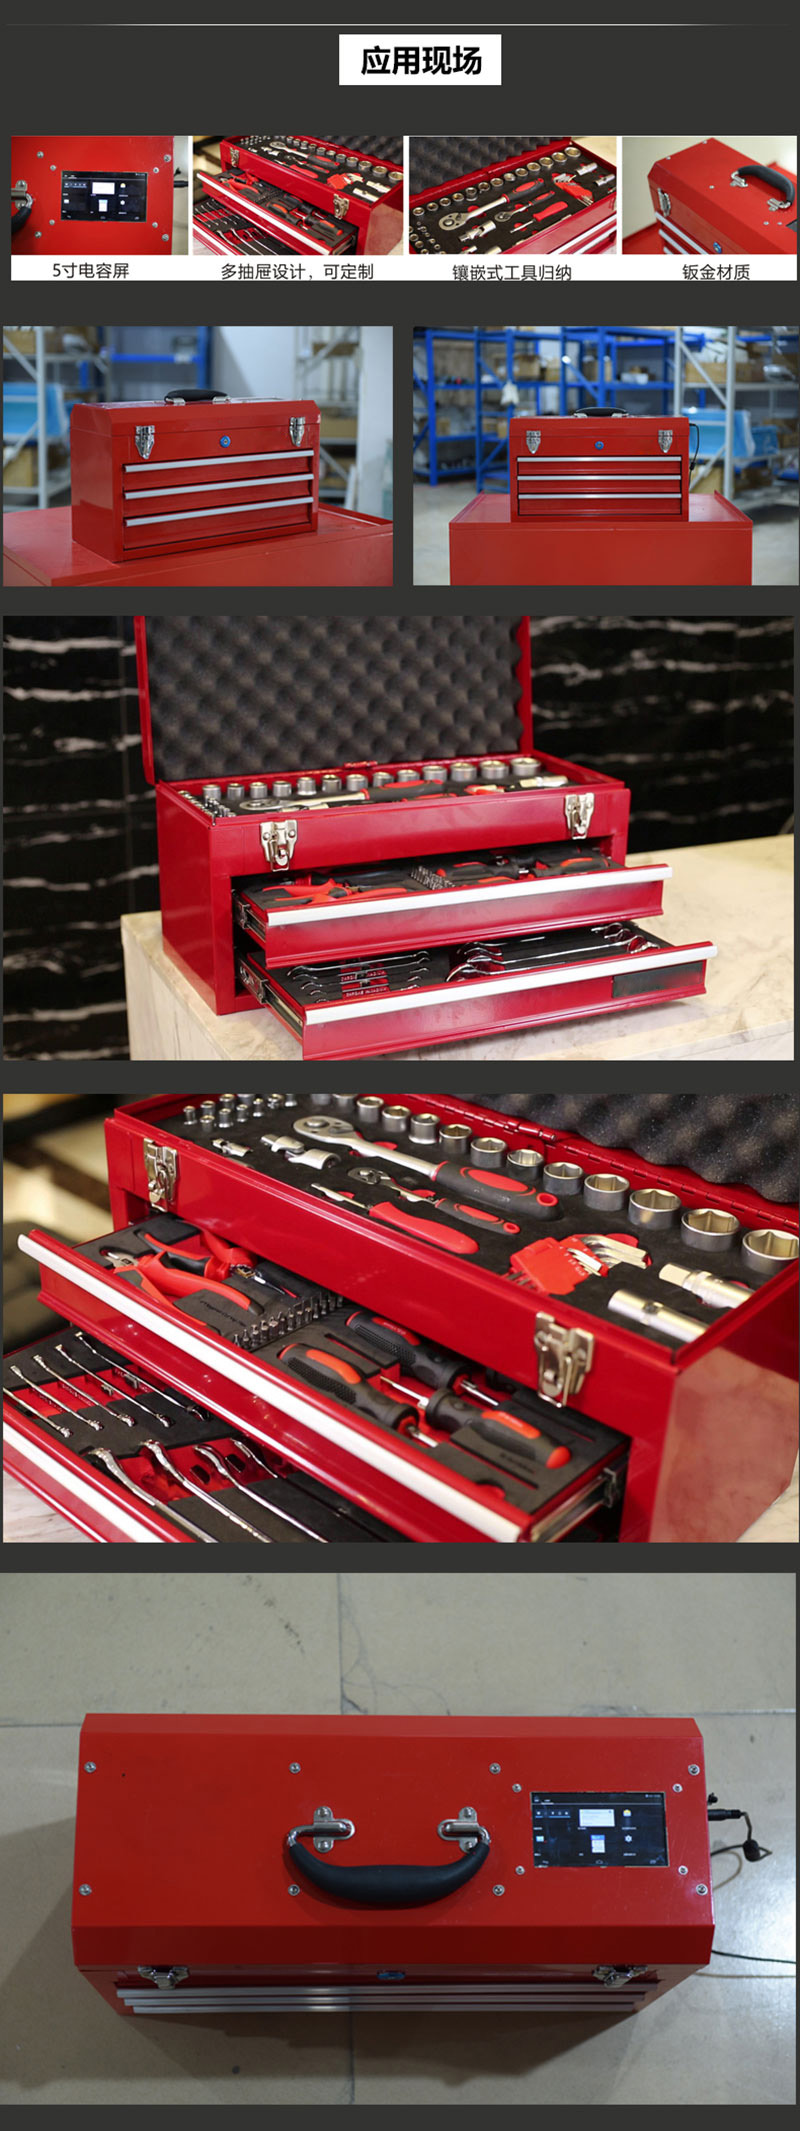 RFID Smart Toolbox Portable Toolbox Intelligent Management of Tools One-click Management of Maintenance Tools